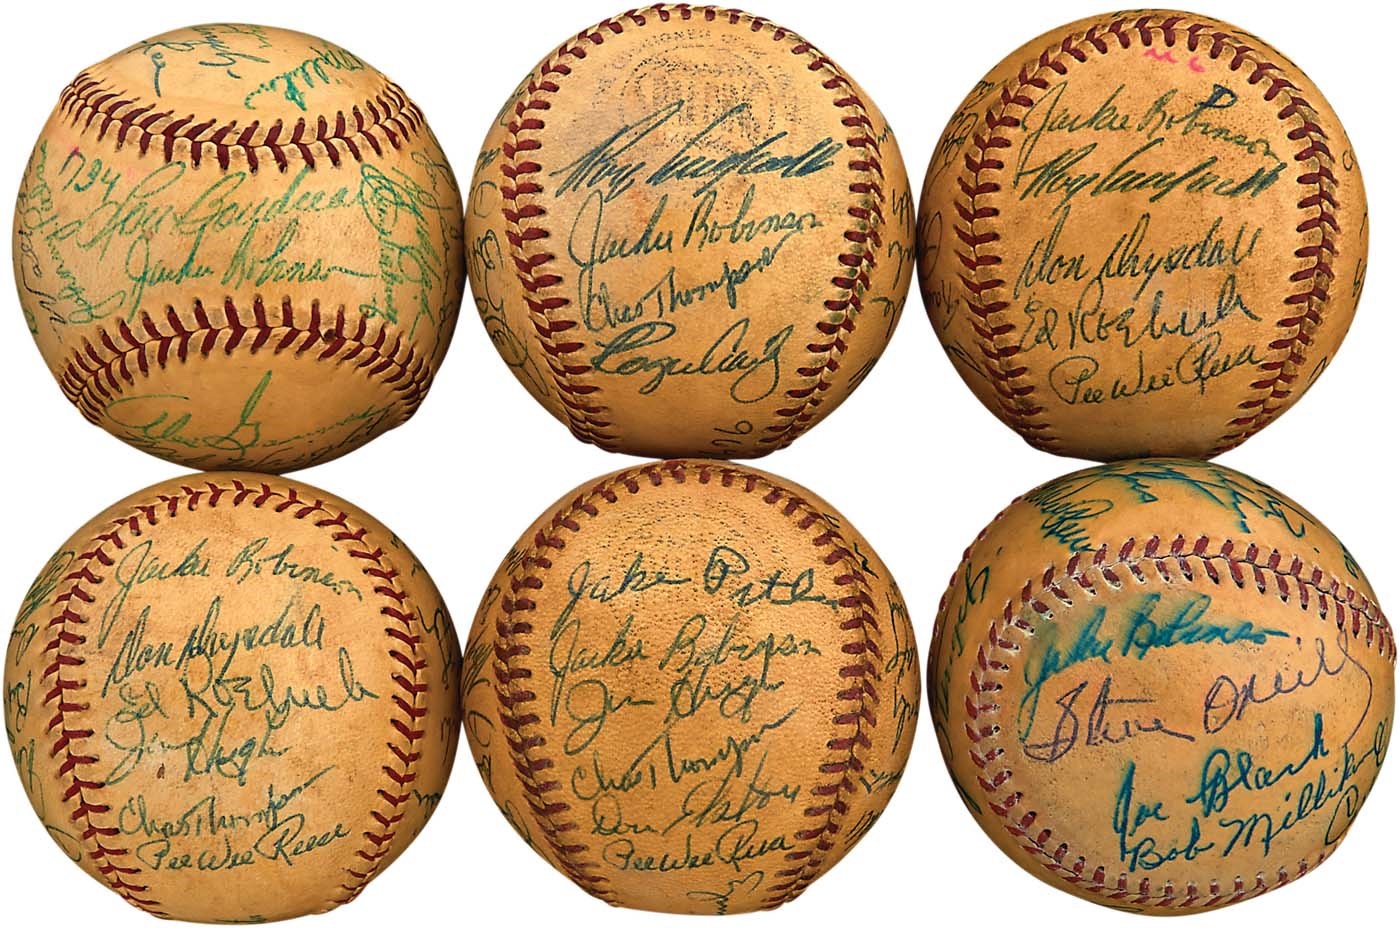 The John O'connor Signed Baseball Collection - 1956 Brooklyn Dodgers & HOFers Team-Signed Baseballs ALL w/Jackie Robinson (6)